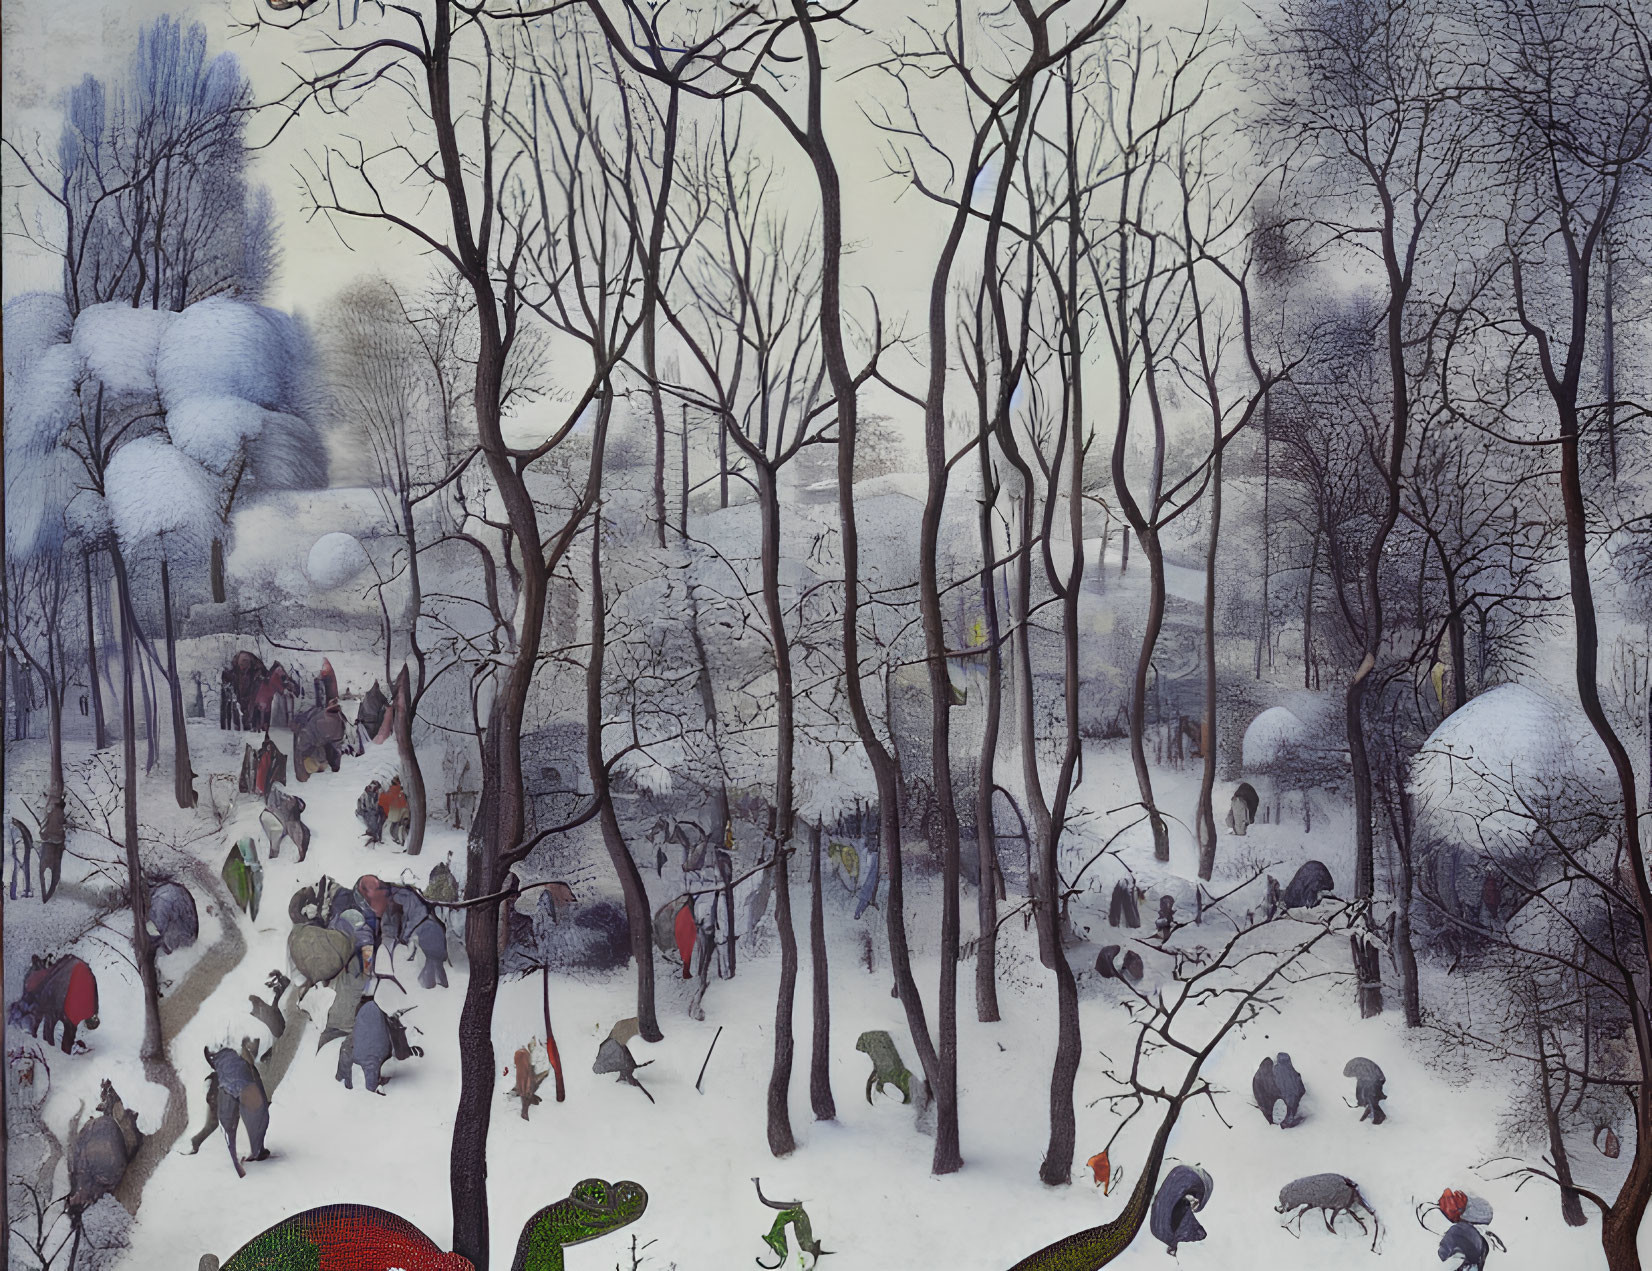 Winter Wonderland with Figures and Animals in Snowy Forest